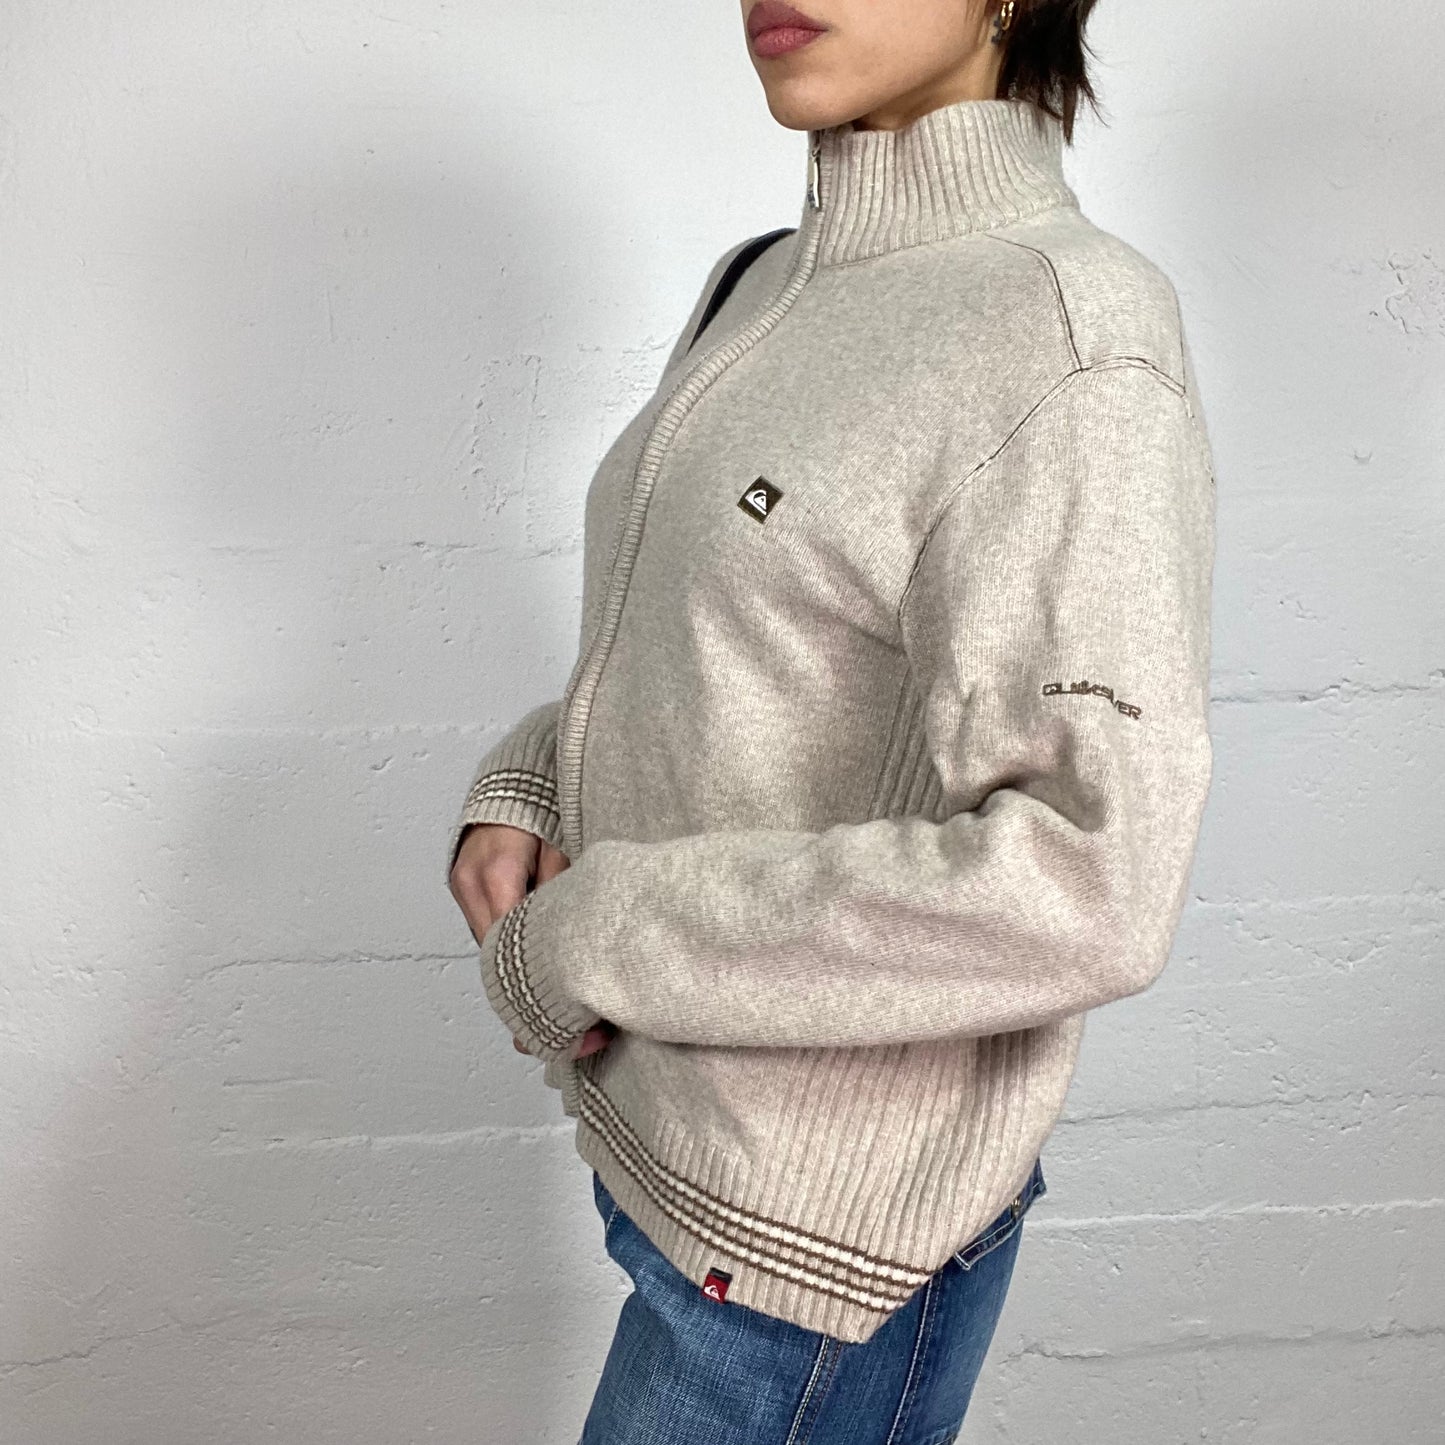 Vintage 2000's Quicksilver Sporty Beige Zip Up Knitted Sweater (L)